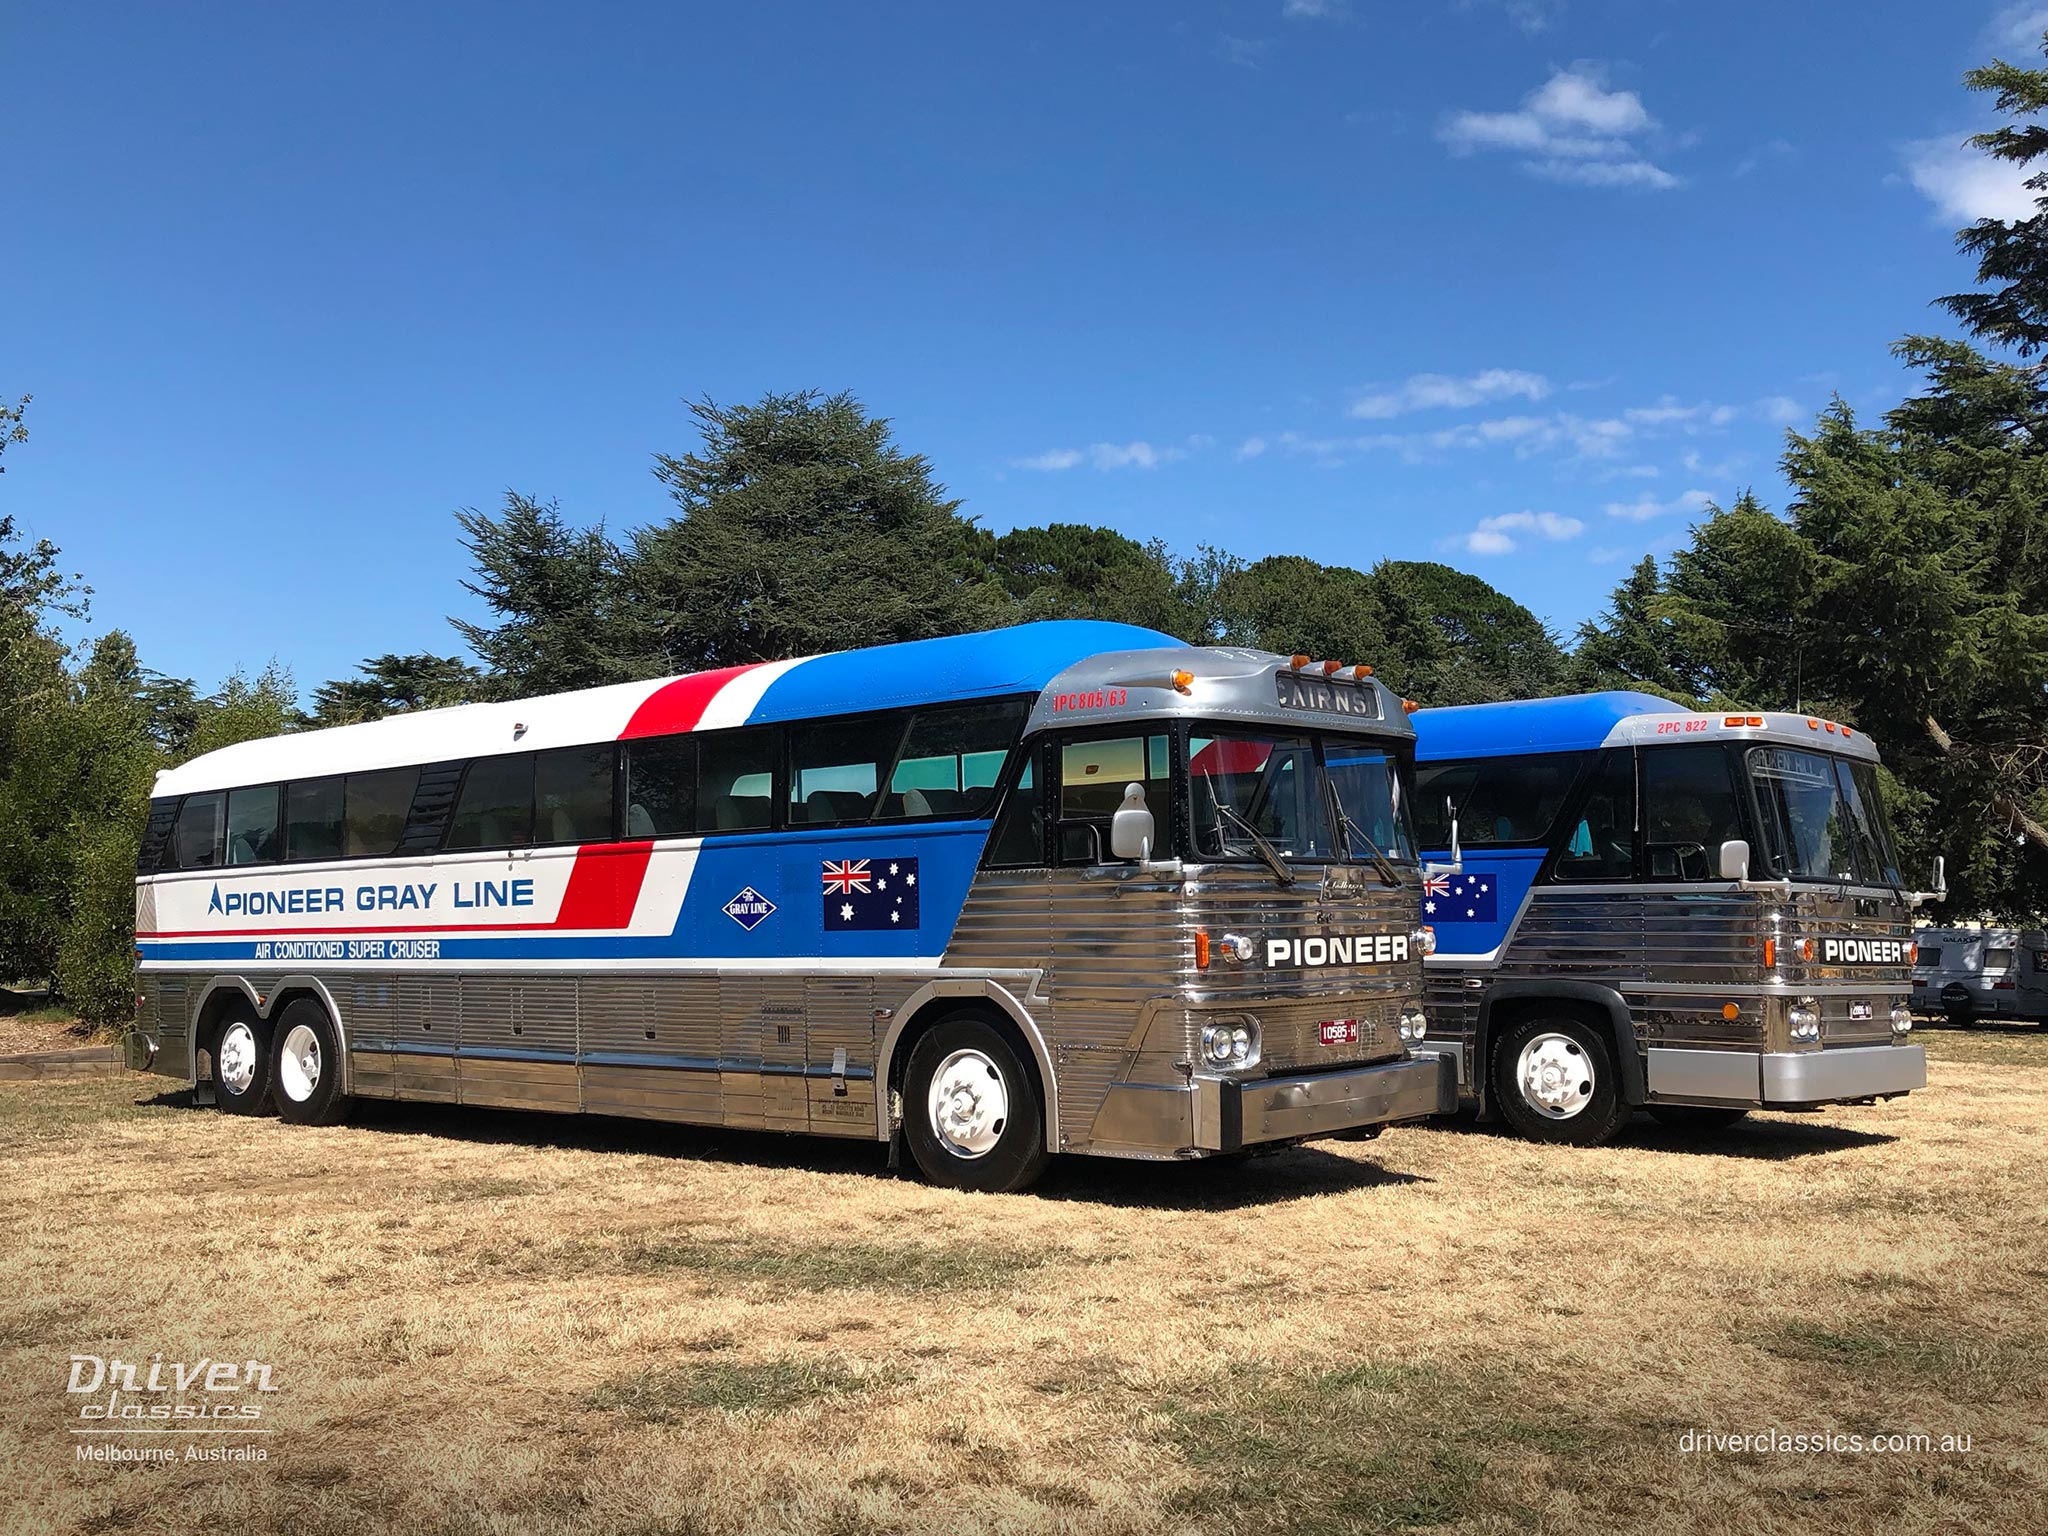 MCI MC7 bus (1972 model) with MCI MC8 bus (1976 model), Photo taken at Lancefield VIC in February 2022